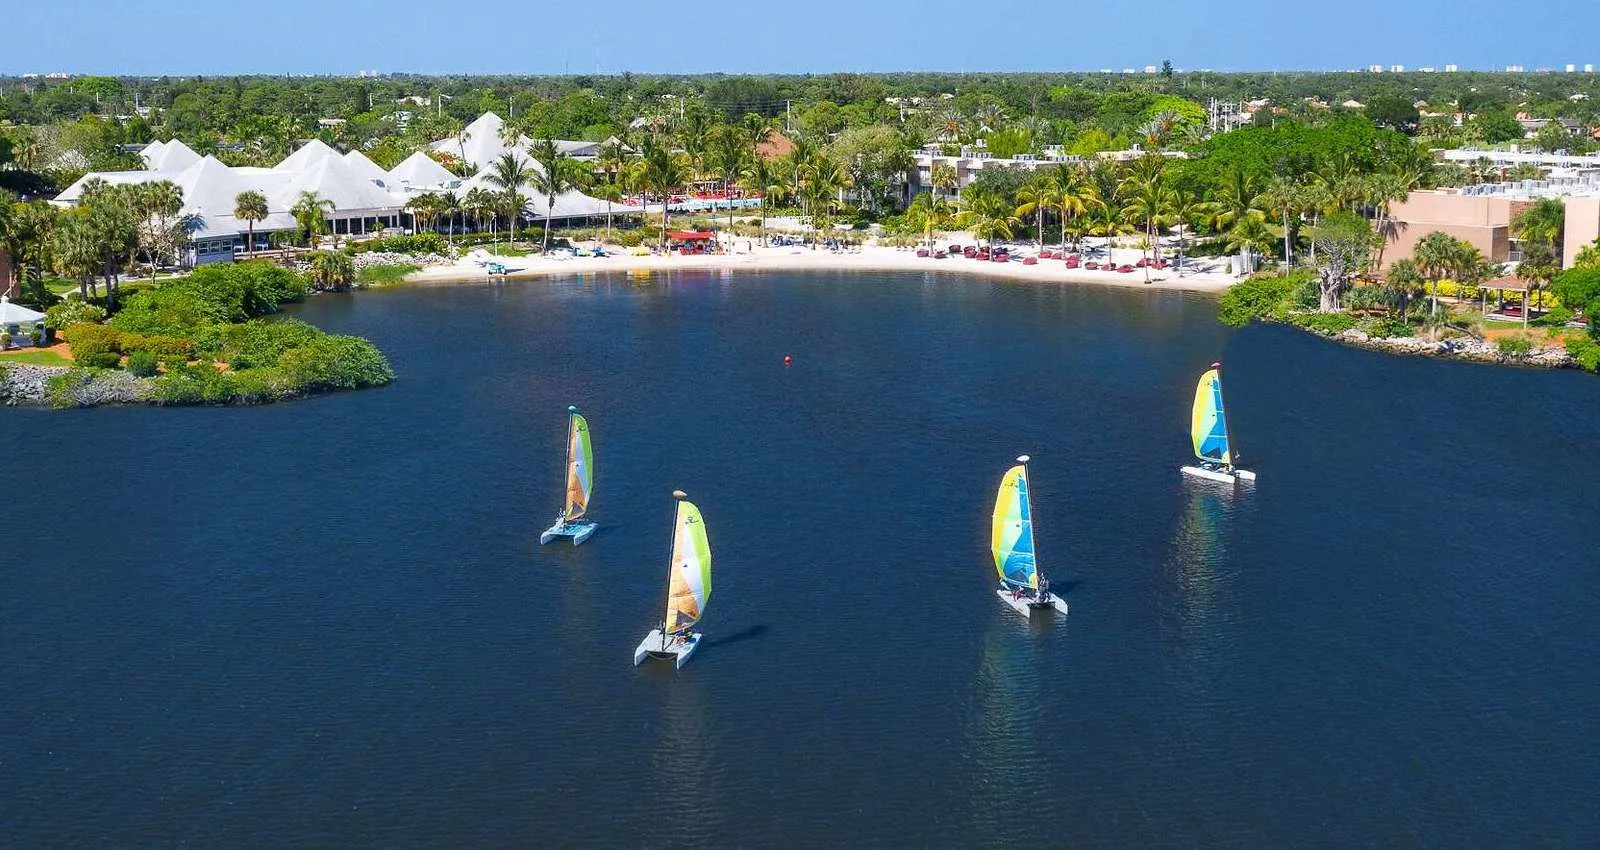 the tranquil bay at club med sandpiper is great place for water sports like saling on the 4 small catamarans. this makes it perfect for a winter vacation.